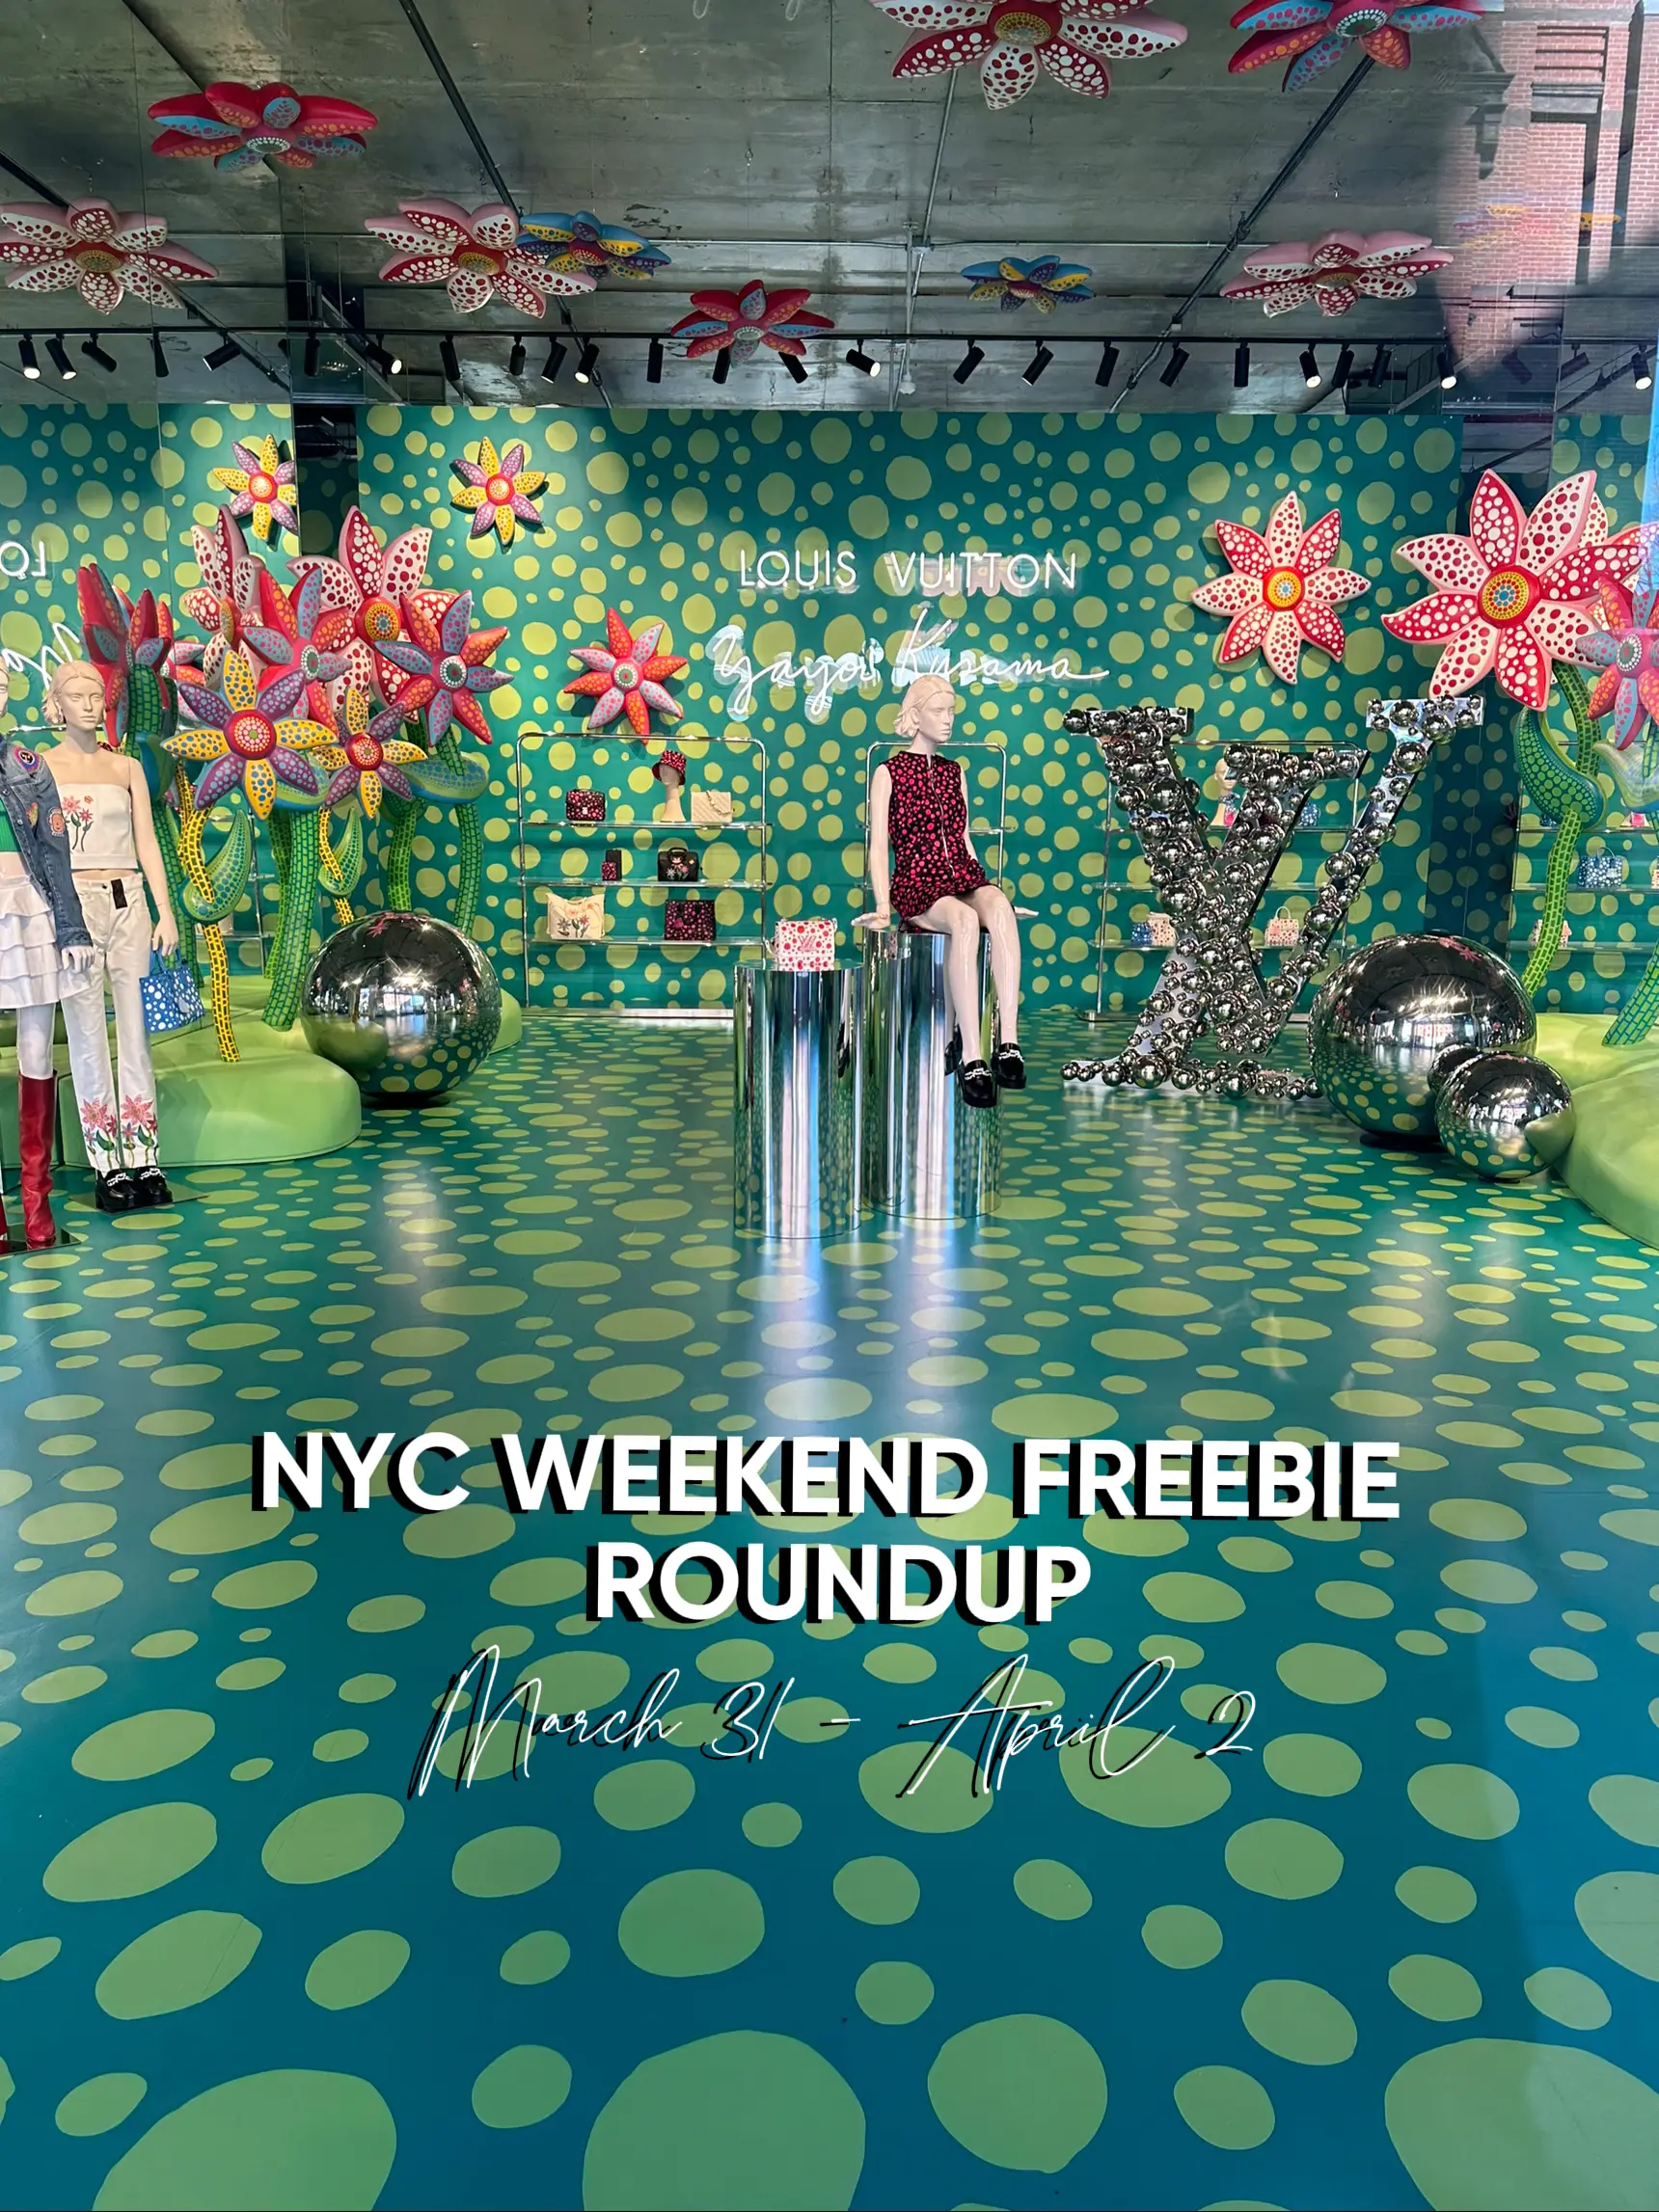 NYC Weekend Freebie Roundup March 31 - April 2's images